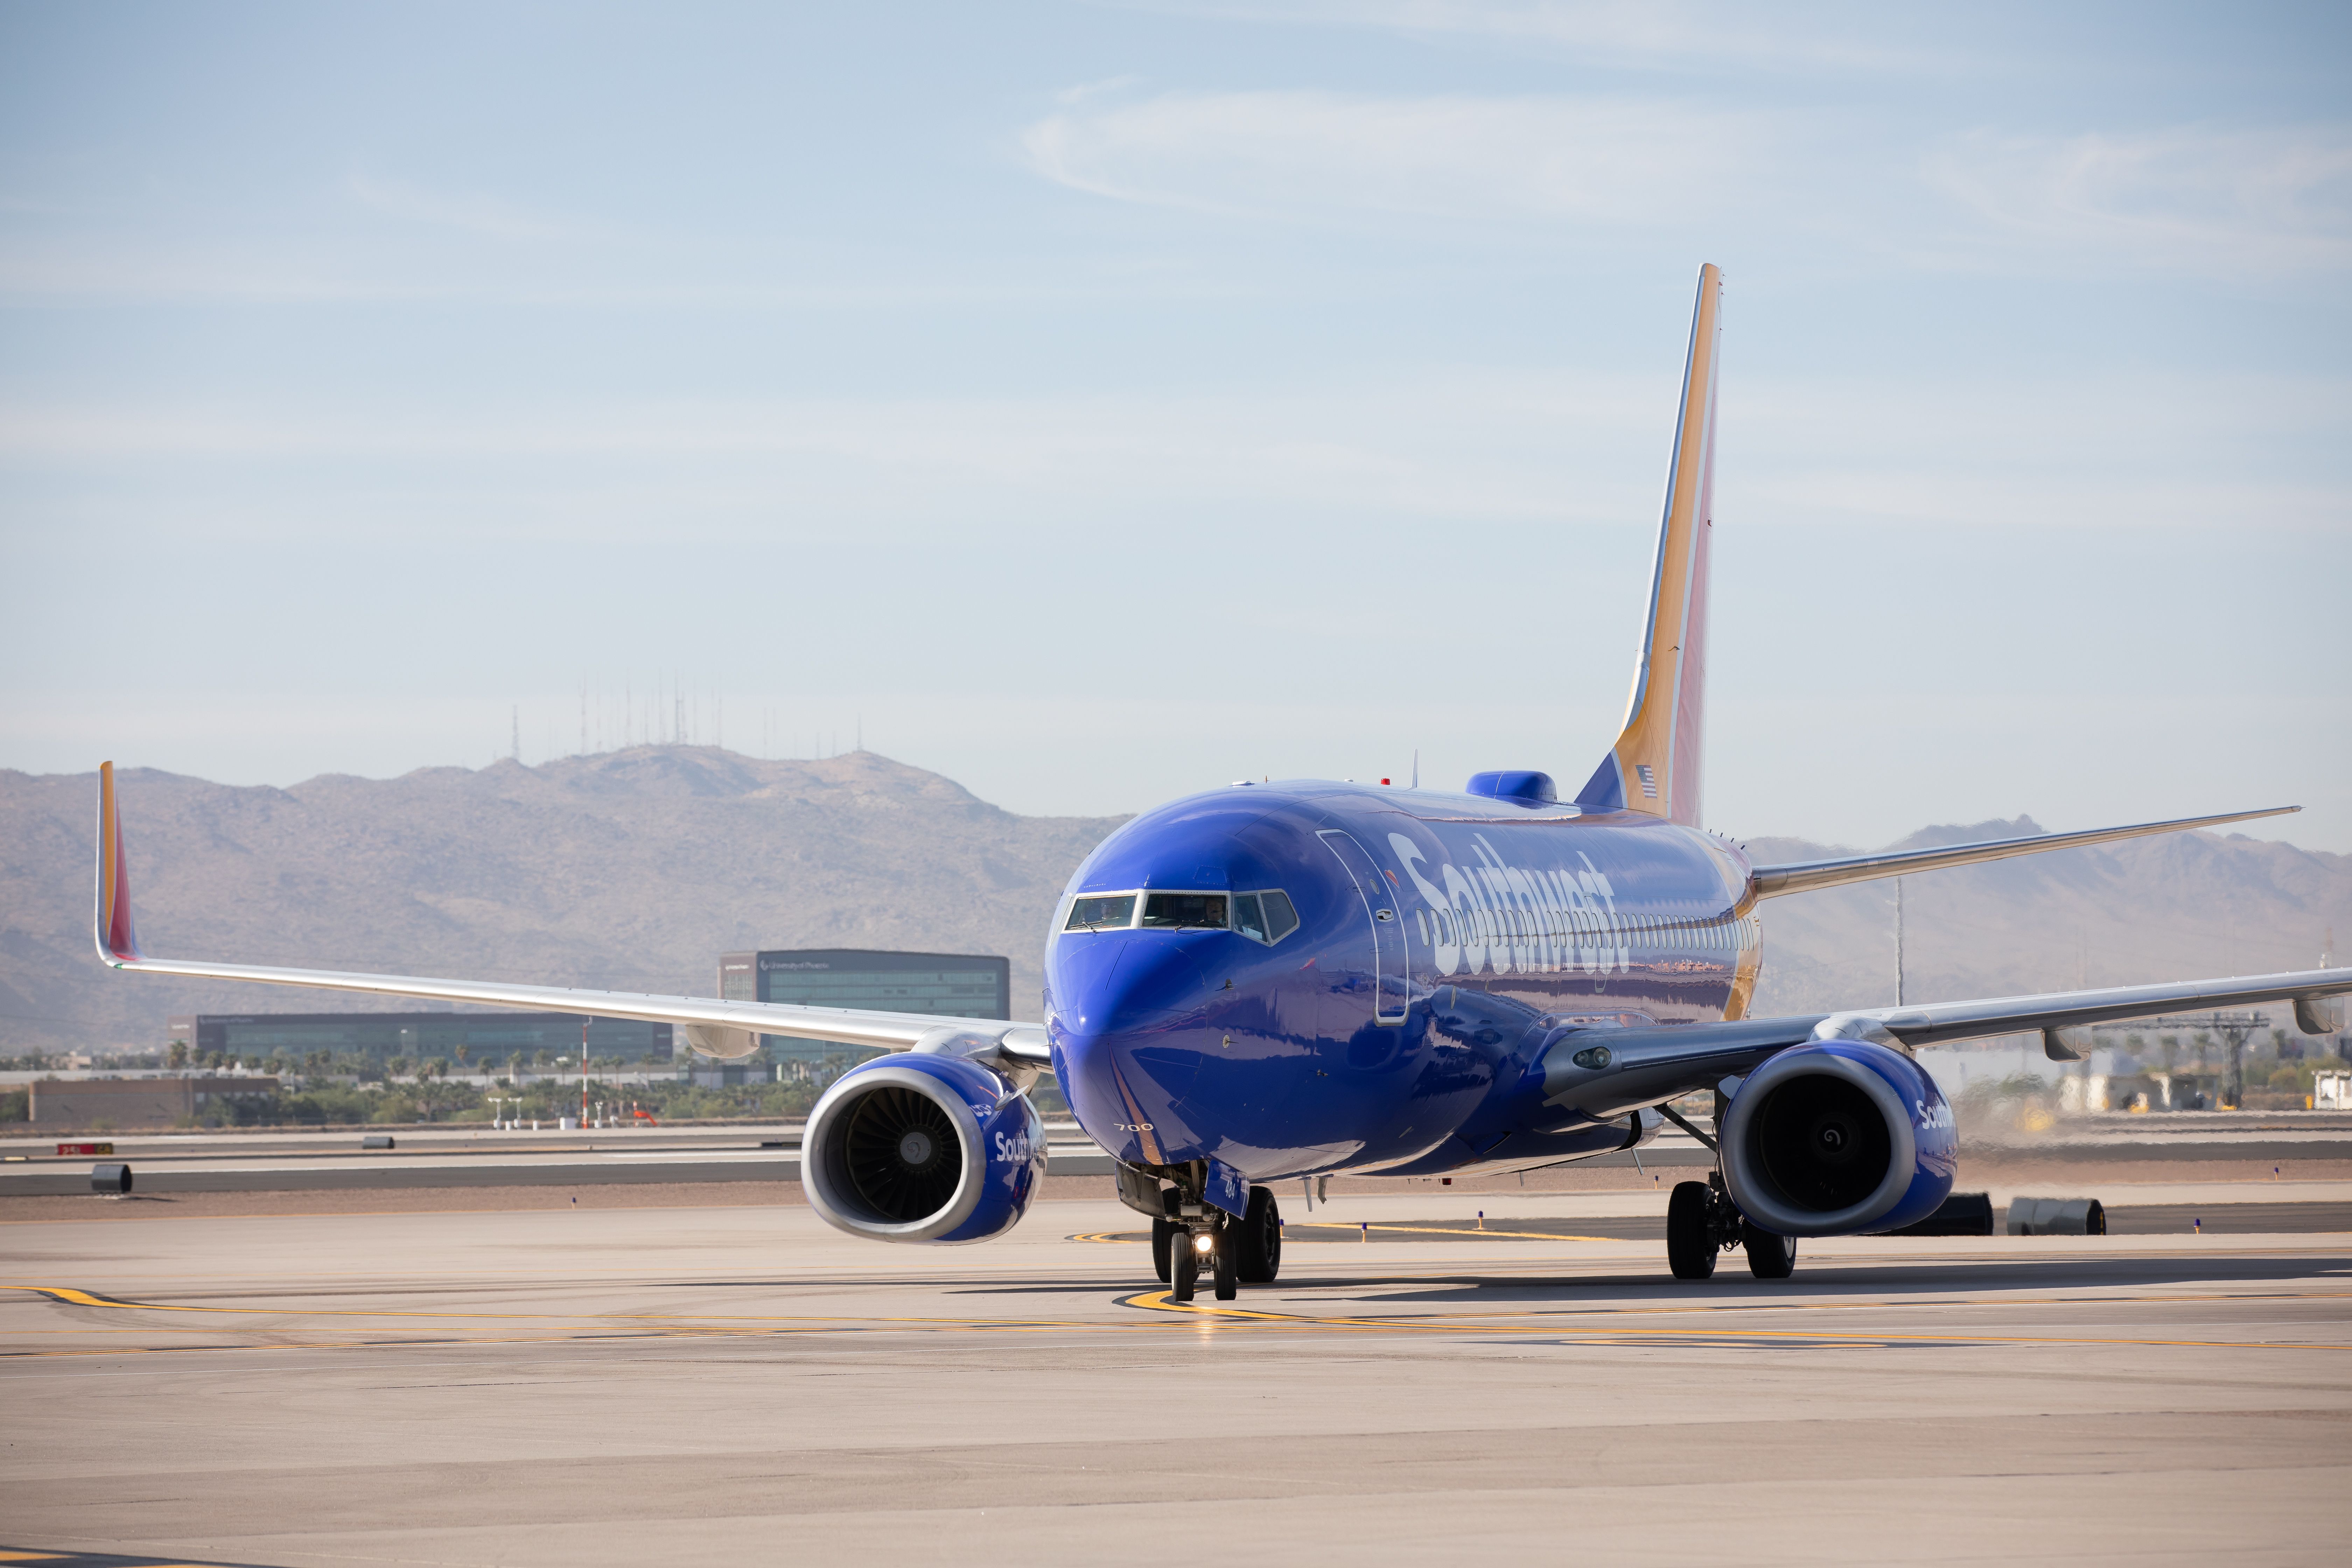 A Southwest Airlines Boeing 737 on an airport apron.